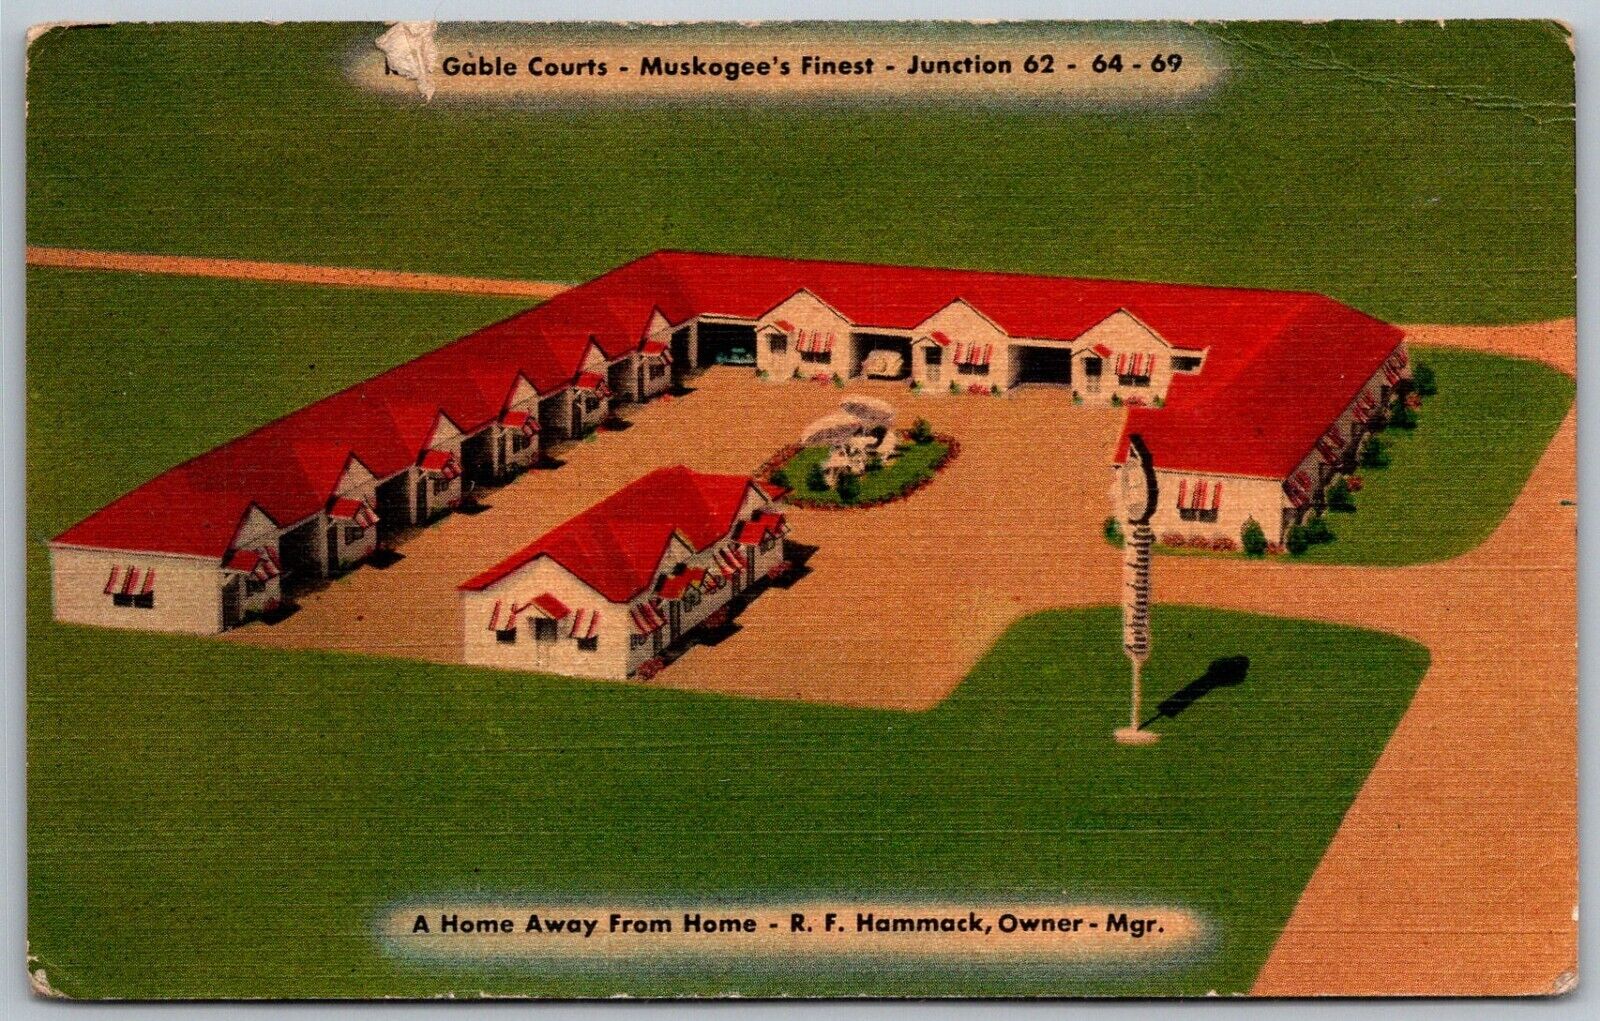 Muskogee Oklahoma 1950s Postcard Red Gable Courts Motel 